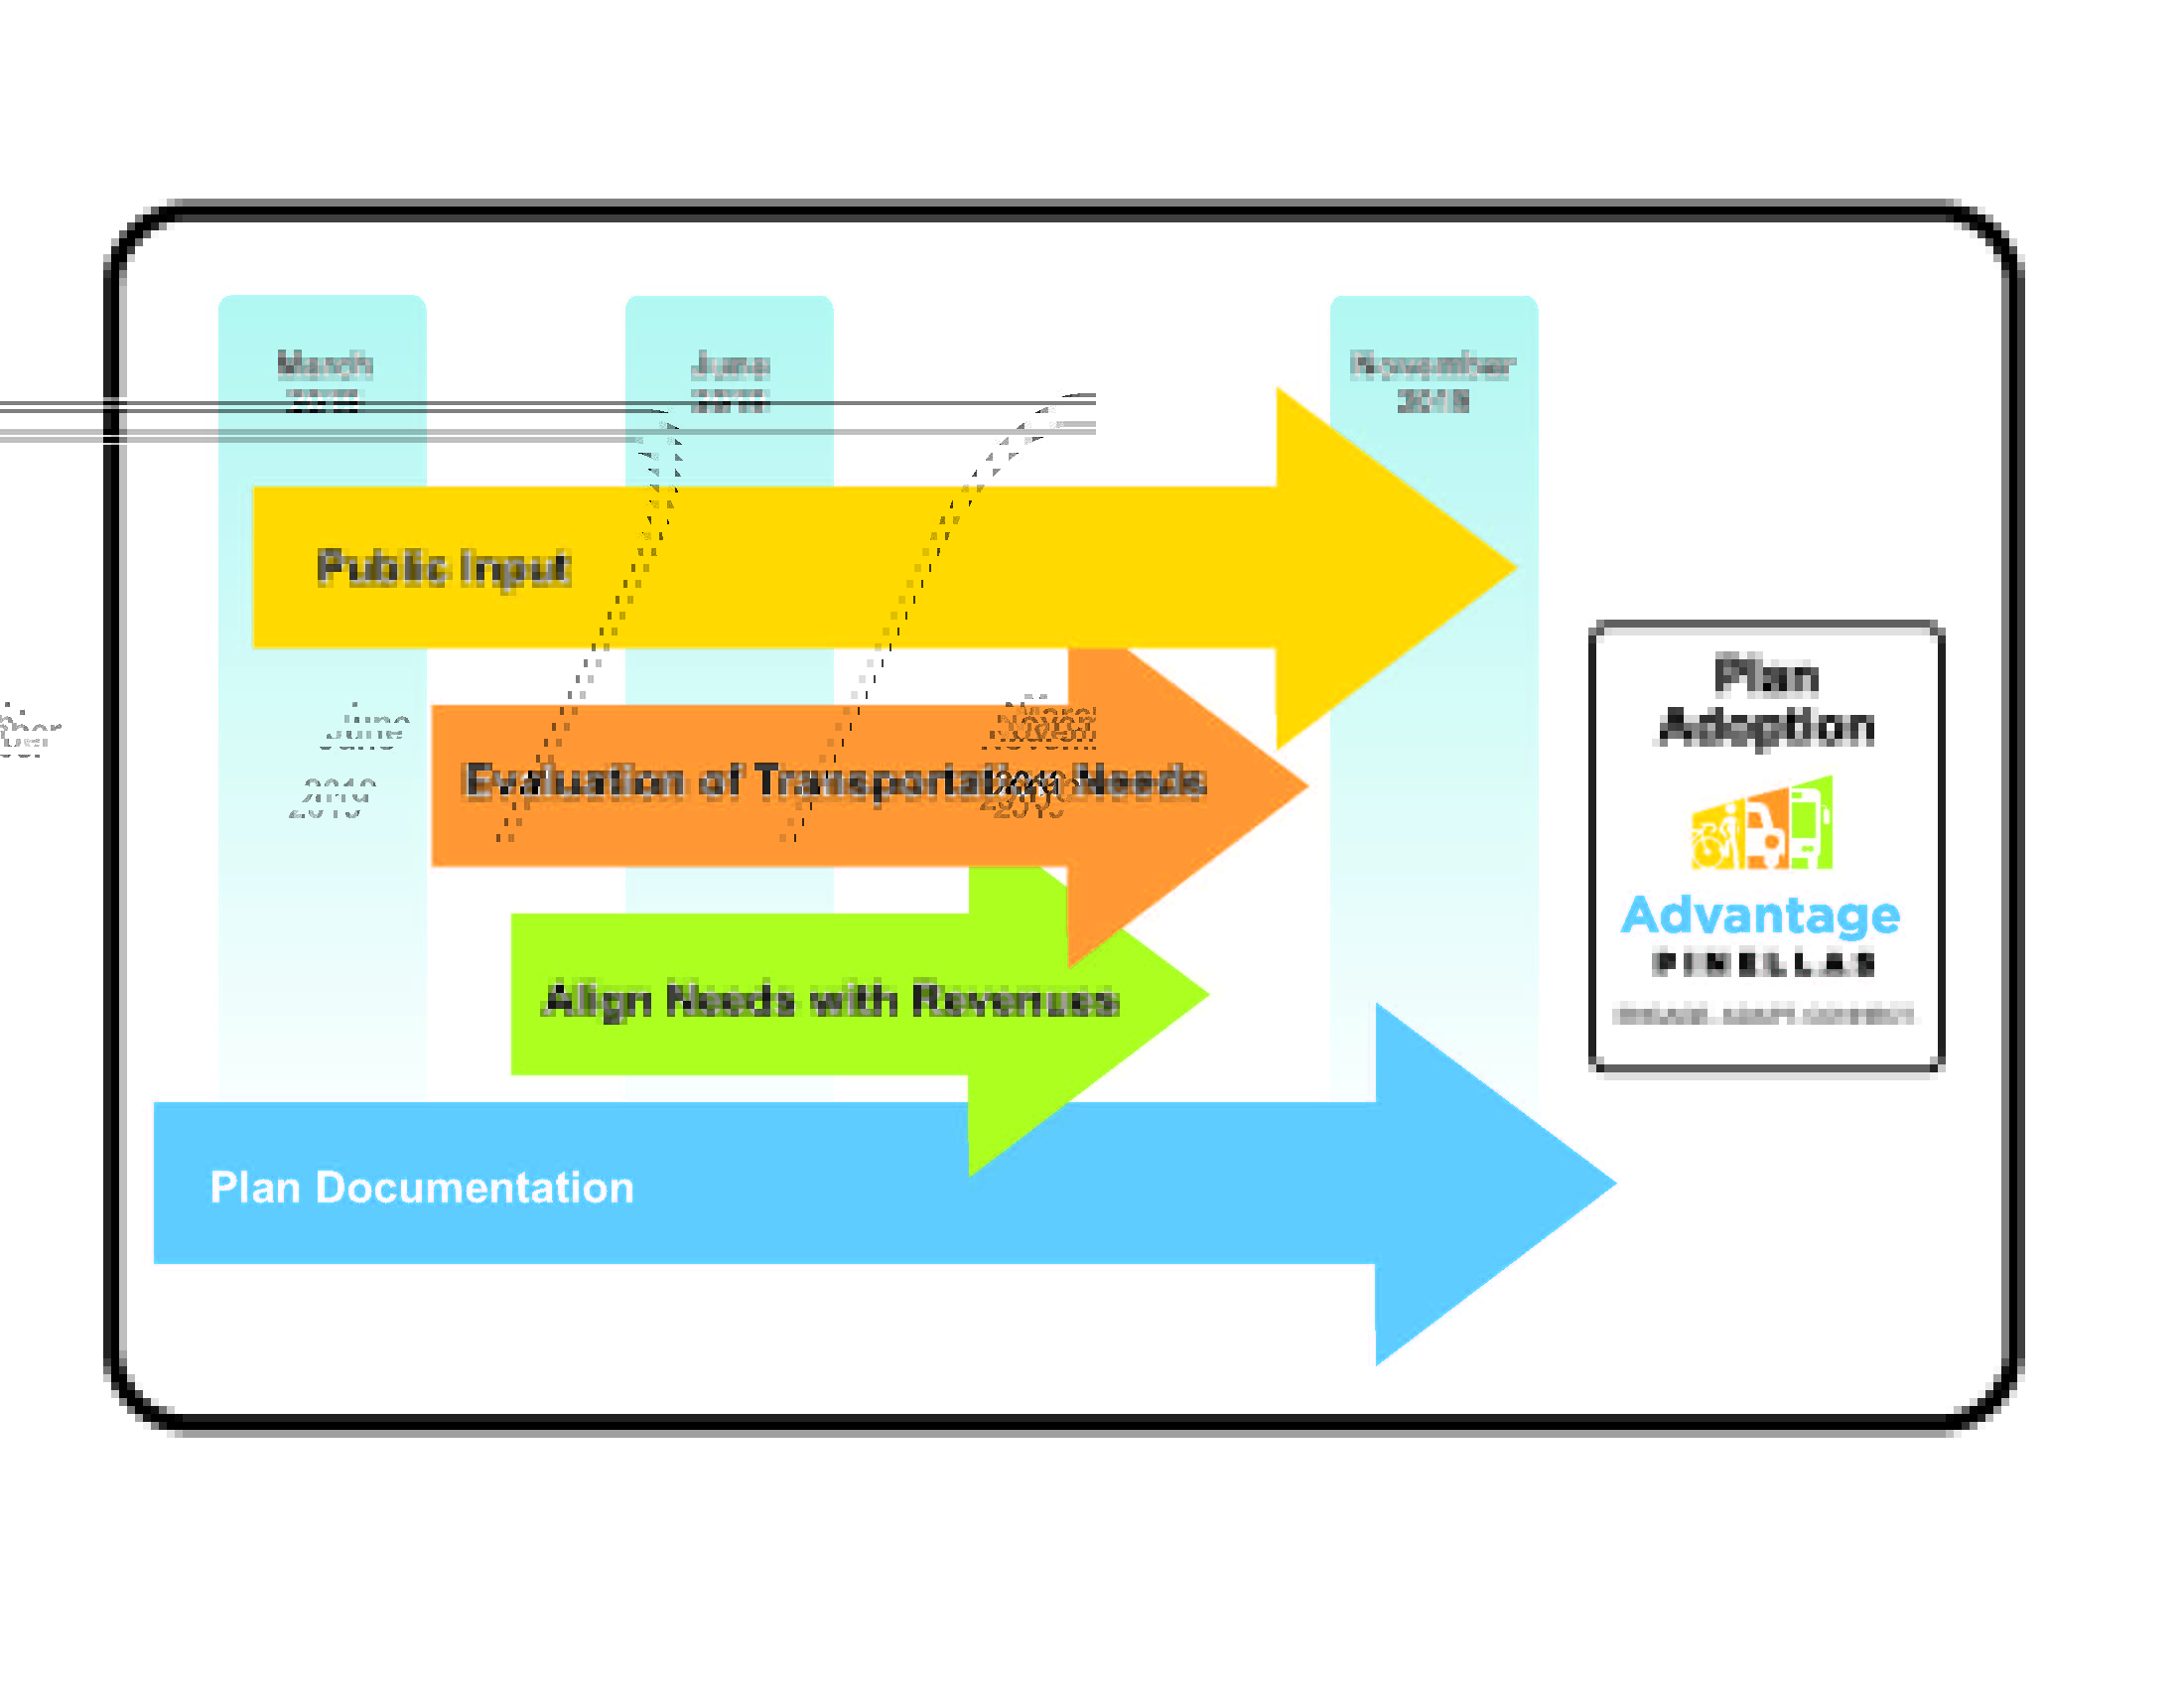 Phases of LRTP: Public input, March through November 2019 Evaluation of Transportation Needs, March through October 2019 Align Needs with revenues, May through September 2019 Development of documentation, March through November 2019 Final plan adoption, November 2019